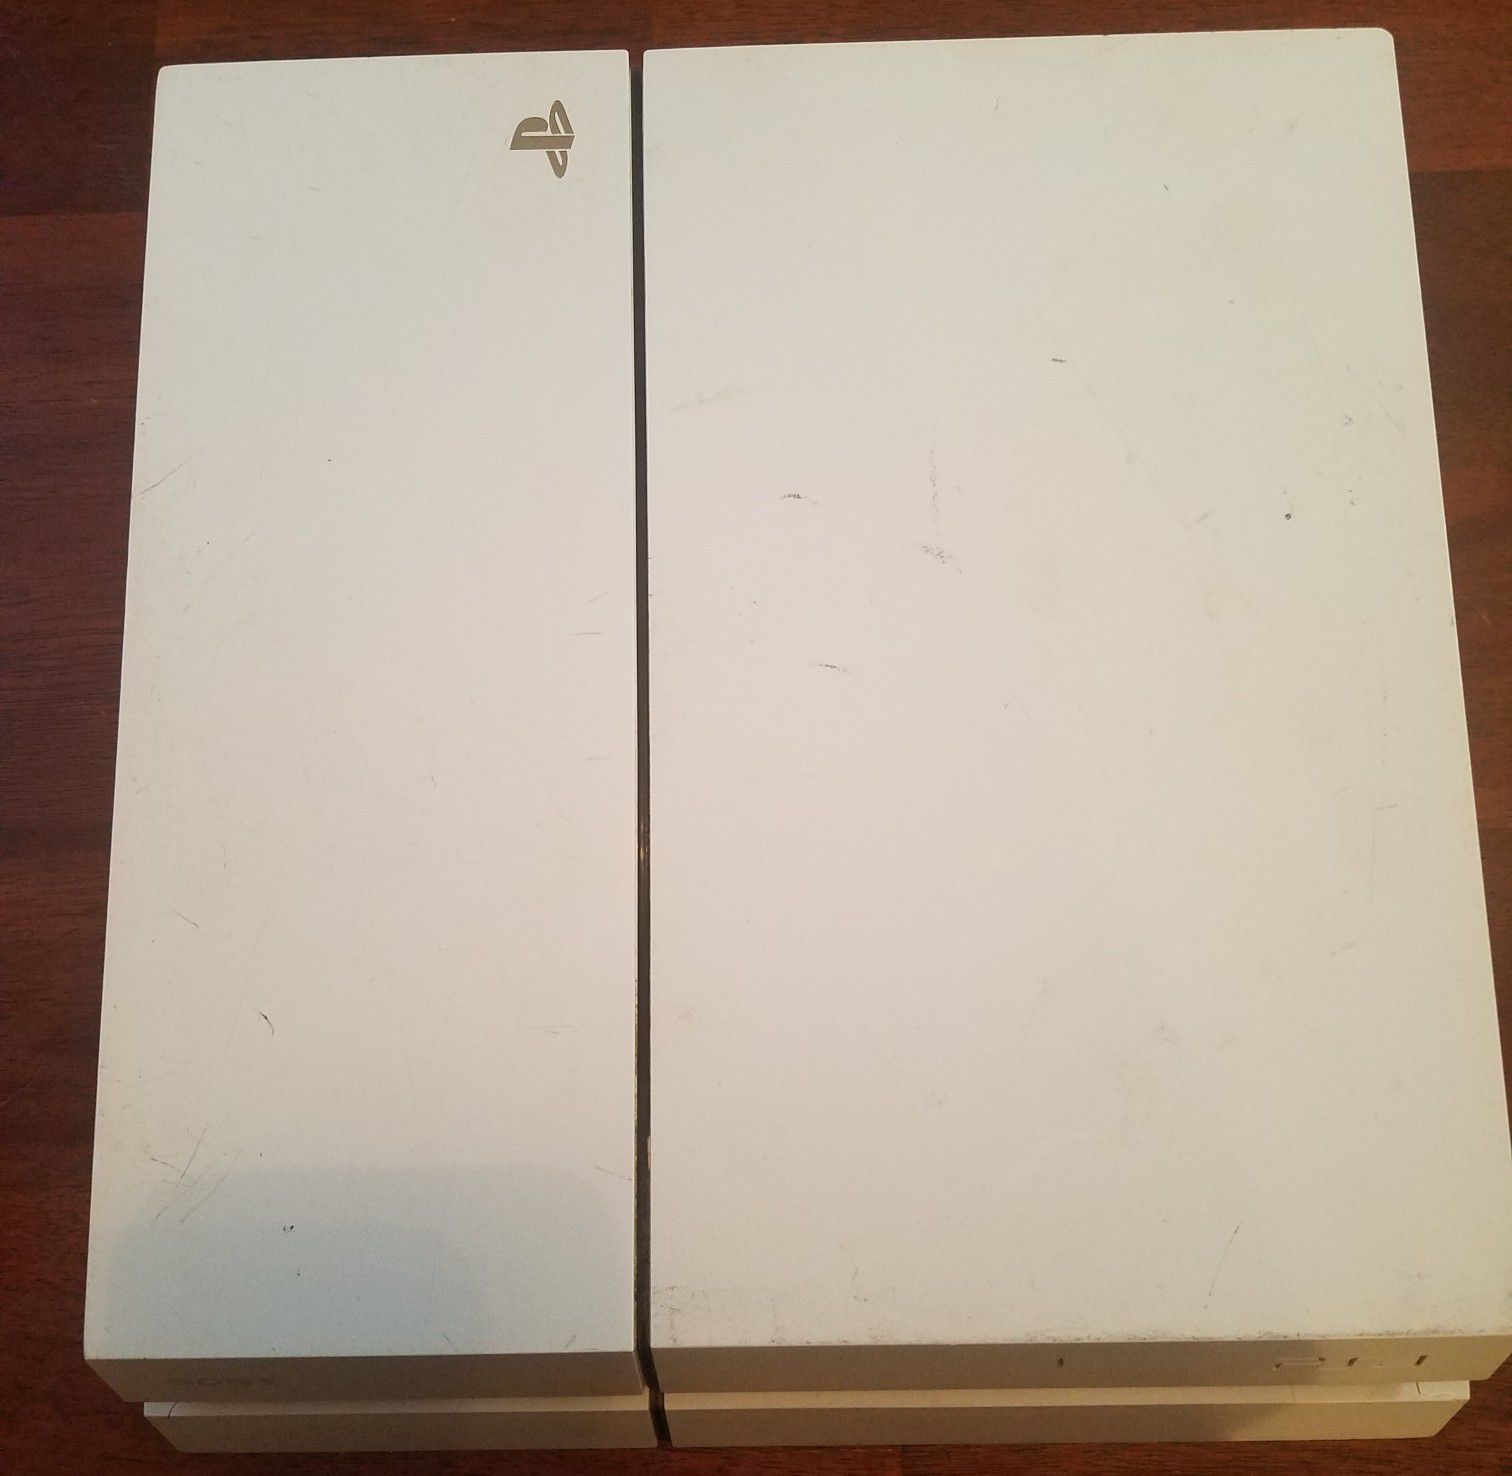 White playstation 4 non working